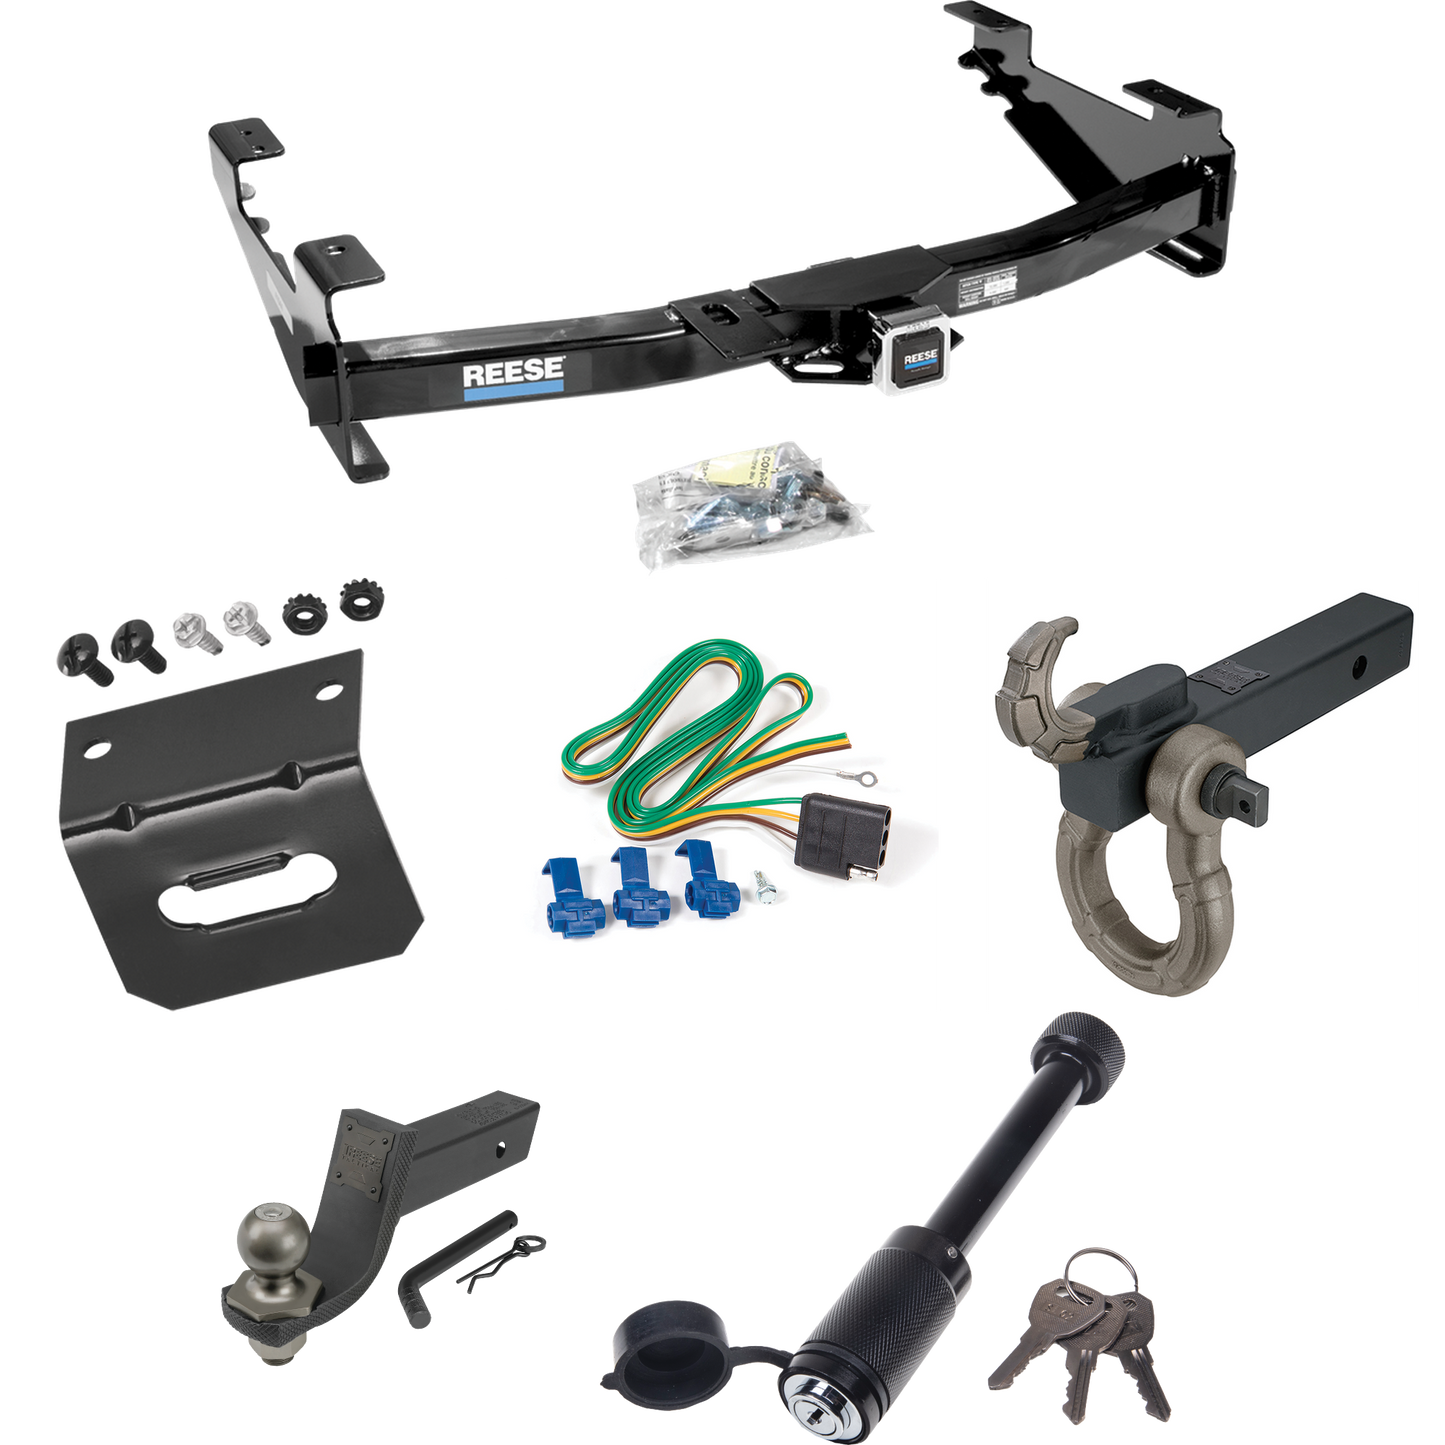 Fits 2003-2007 GMC Sierra 3500 Trailer Hitch Tow PKG w/ 4-Flat Wiring + Interlock Tactical Starter Kit w/ 3-1/4" Drop & 2" Ball + Tactical Hook & Shackle Mount + Tactical Dogbone Lock + Wiring Bracket (For (Classic) Models) By Reese Towpower